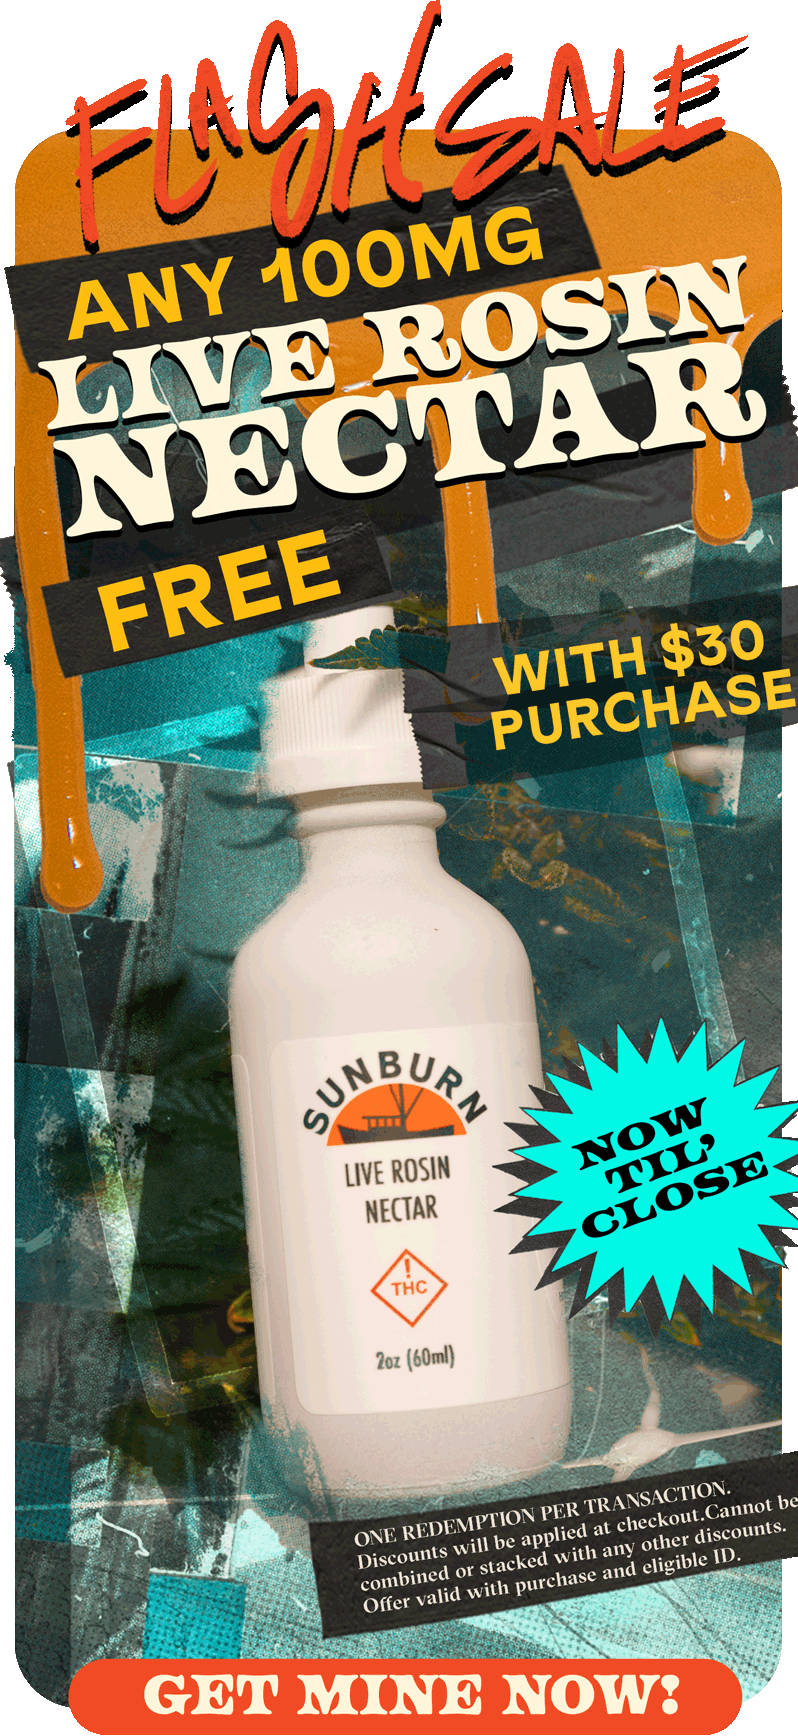 Flash Sale Free 100mg Nectar with $30 Purchase